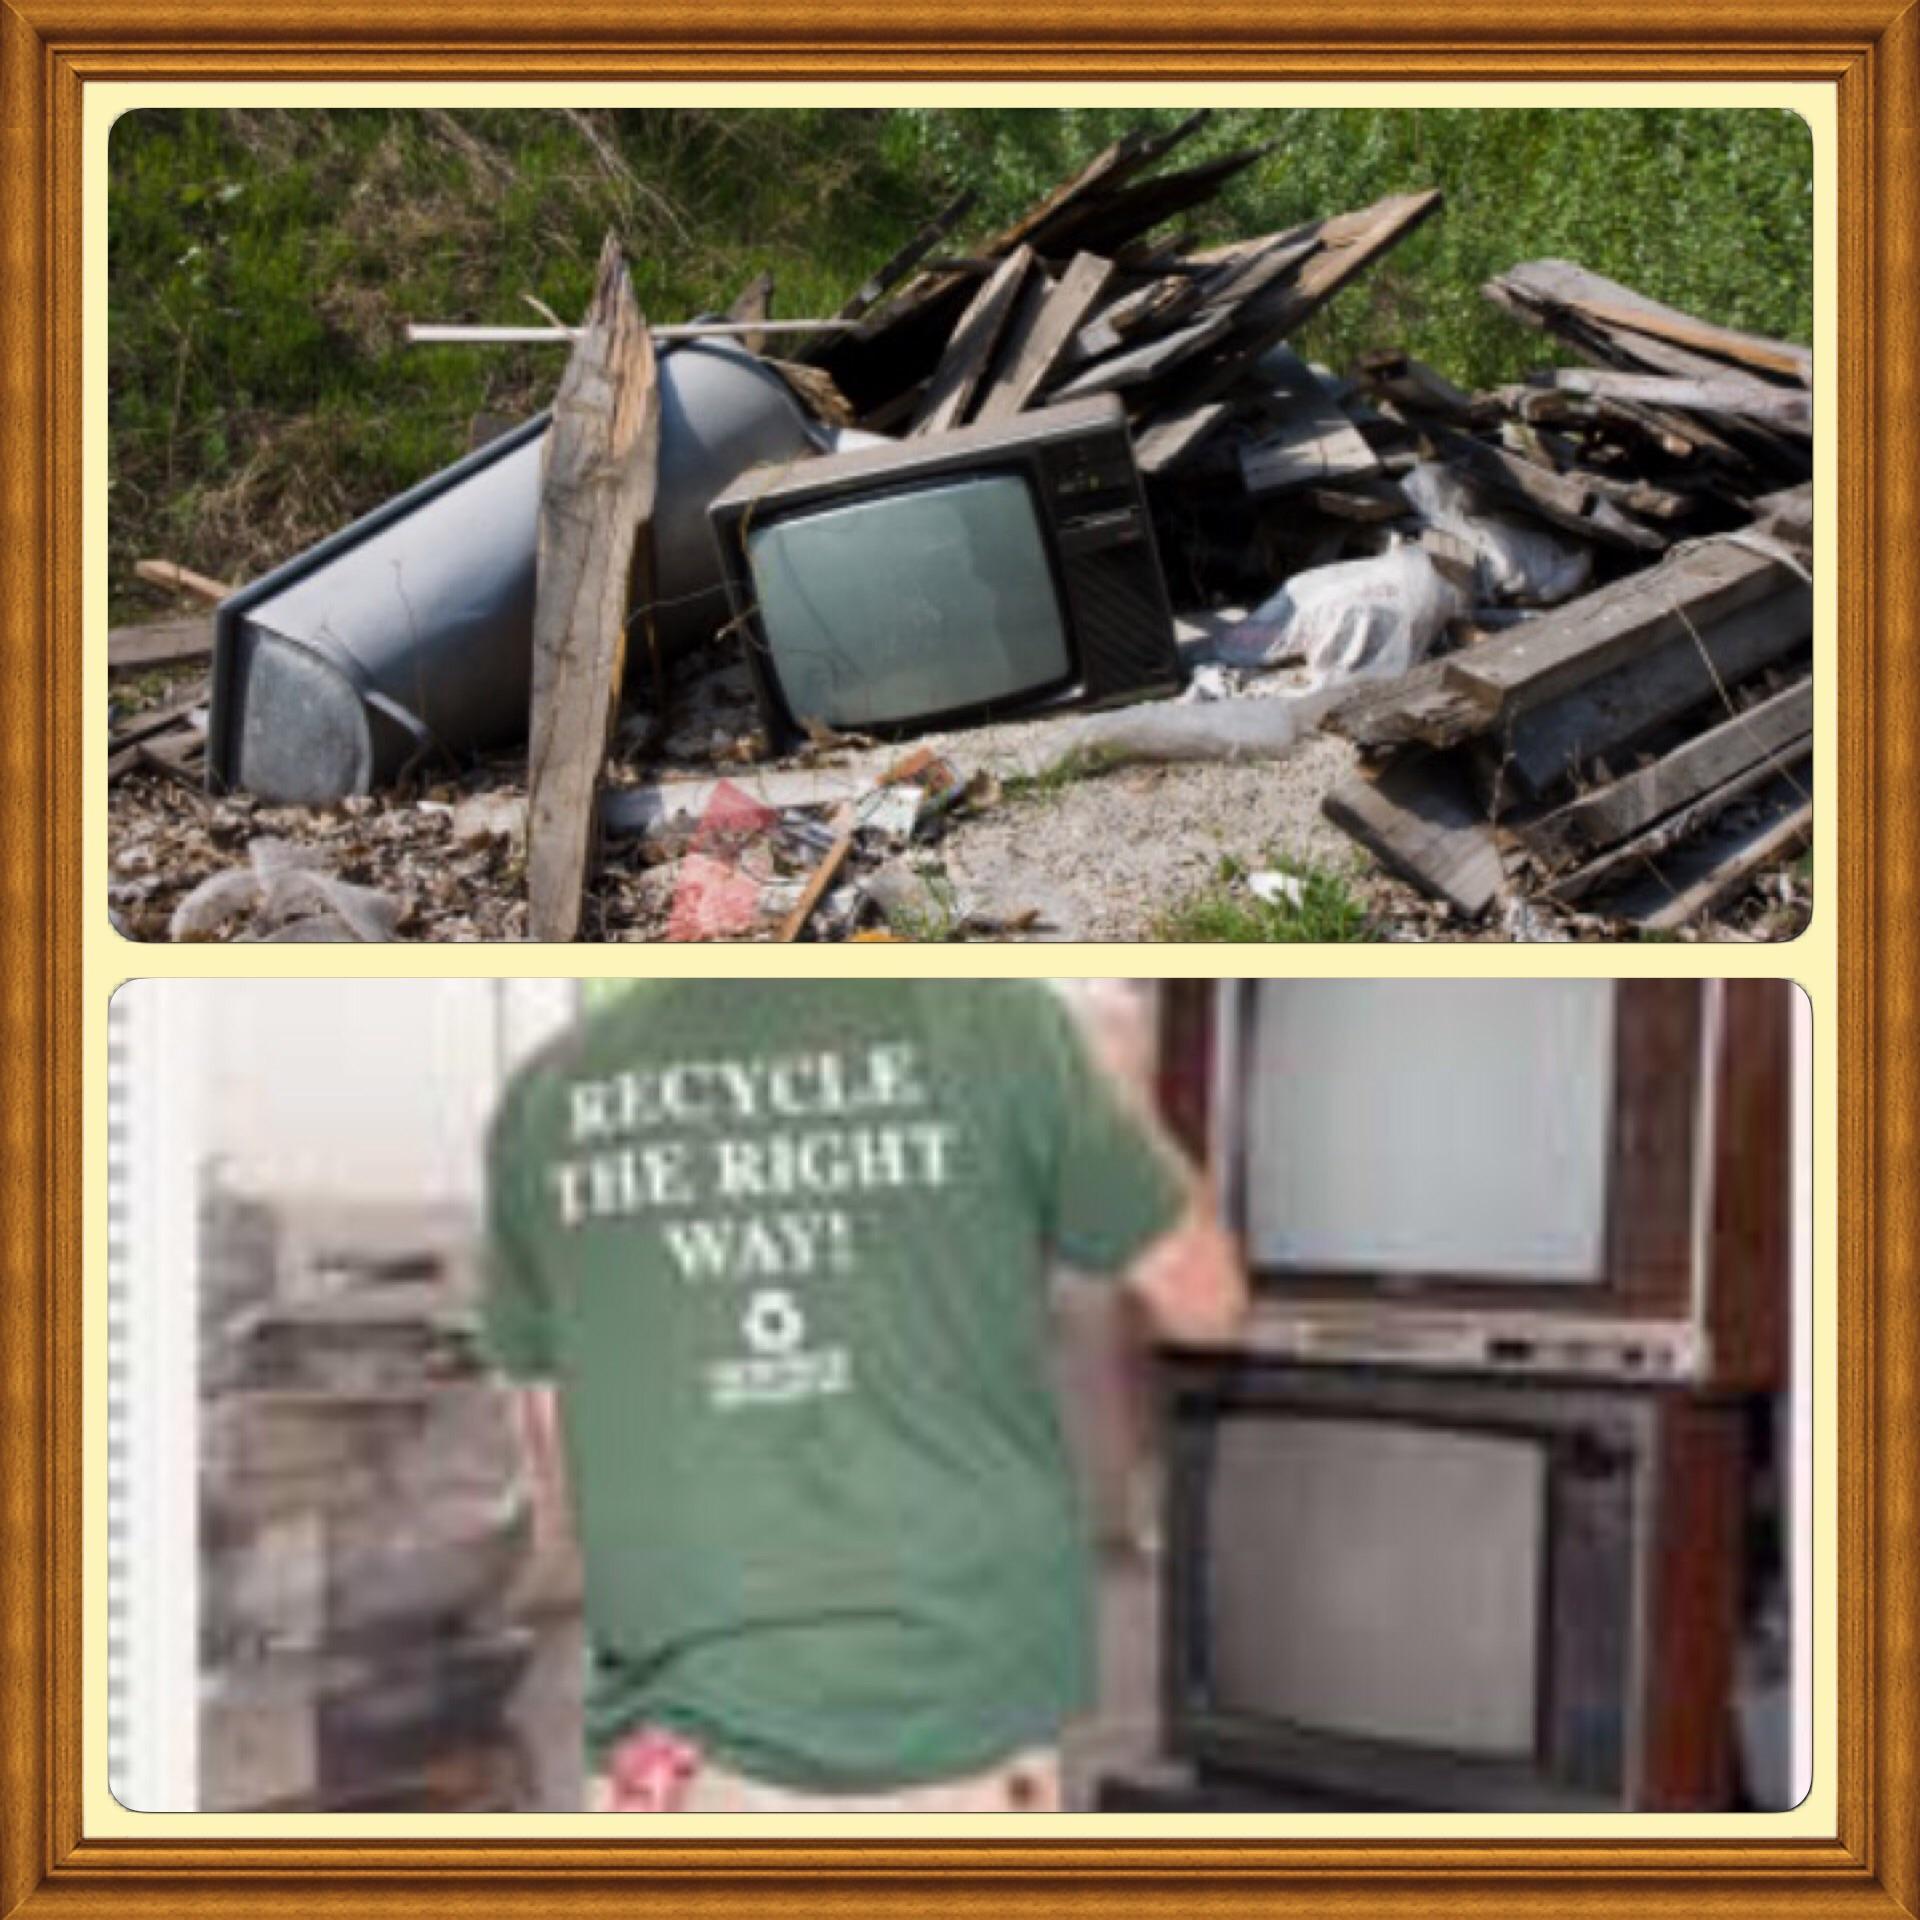 We do the hard work and disposal properly your old TV